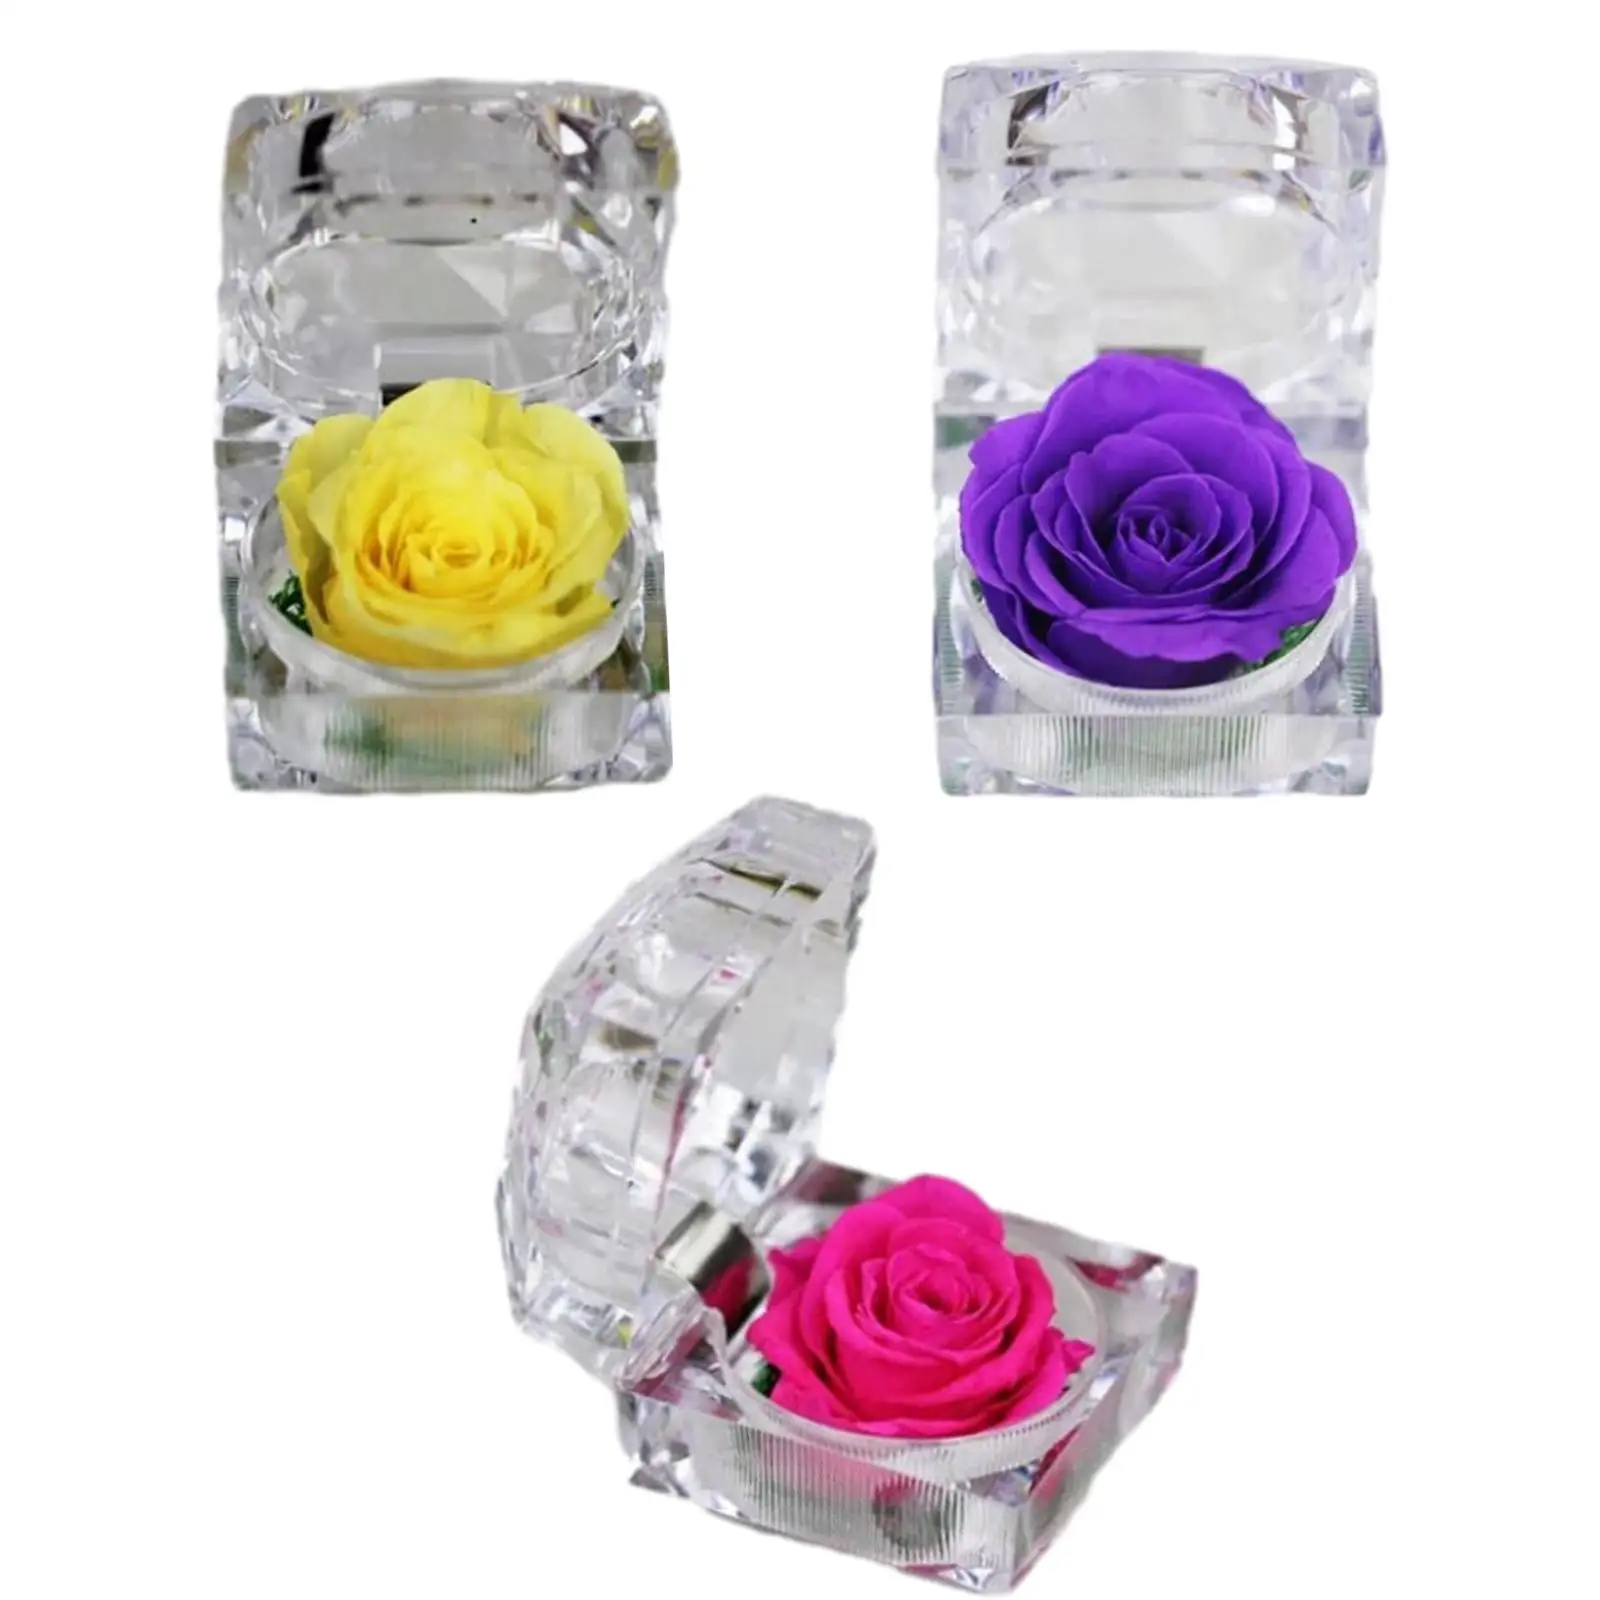 Ring Box Decorative Unique Surprise Ring Holder for Mom Ceremony Girlfriend